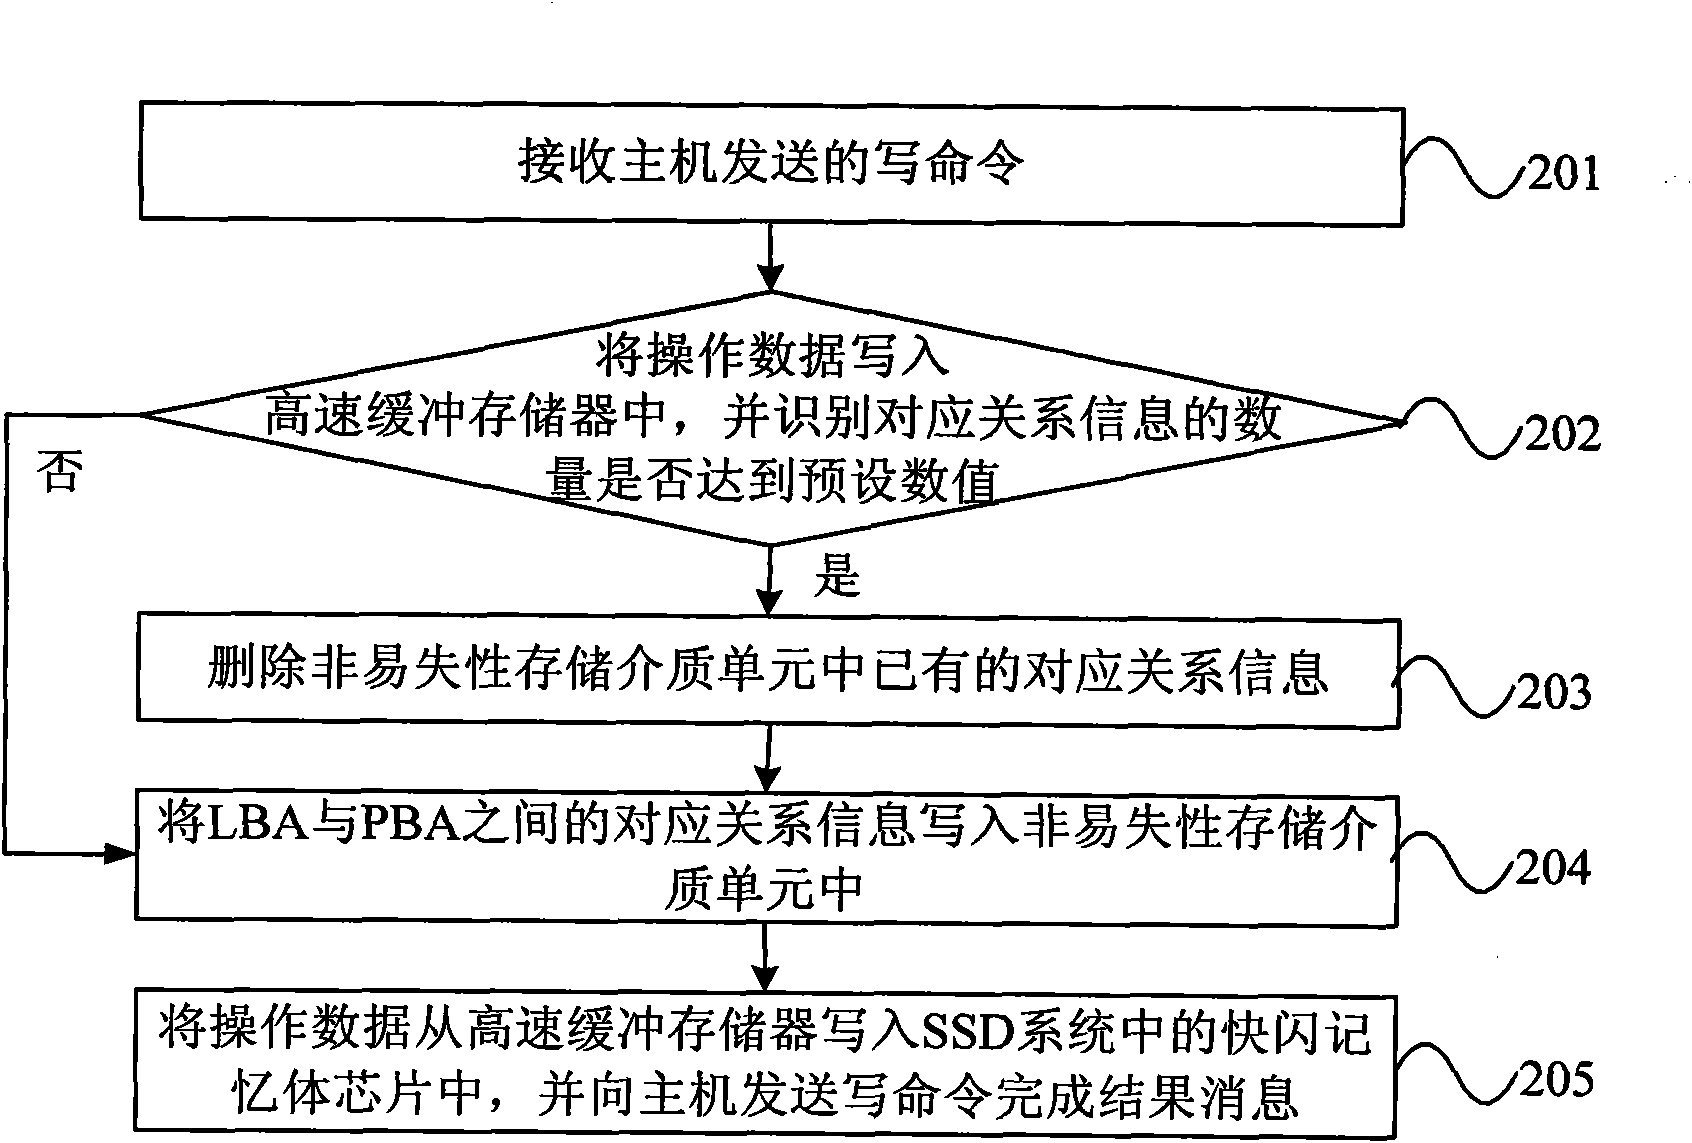 Method and device for data storage and processing, solid-state drive system and data processing system